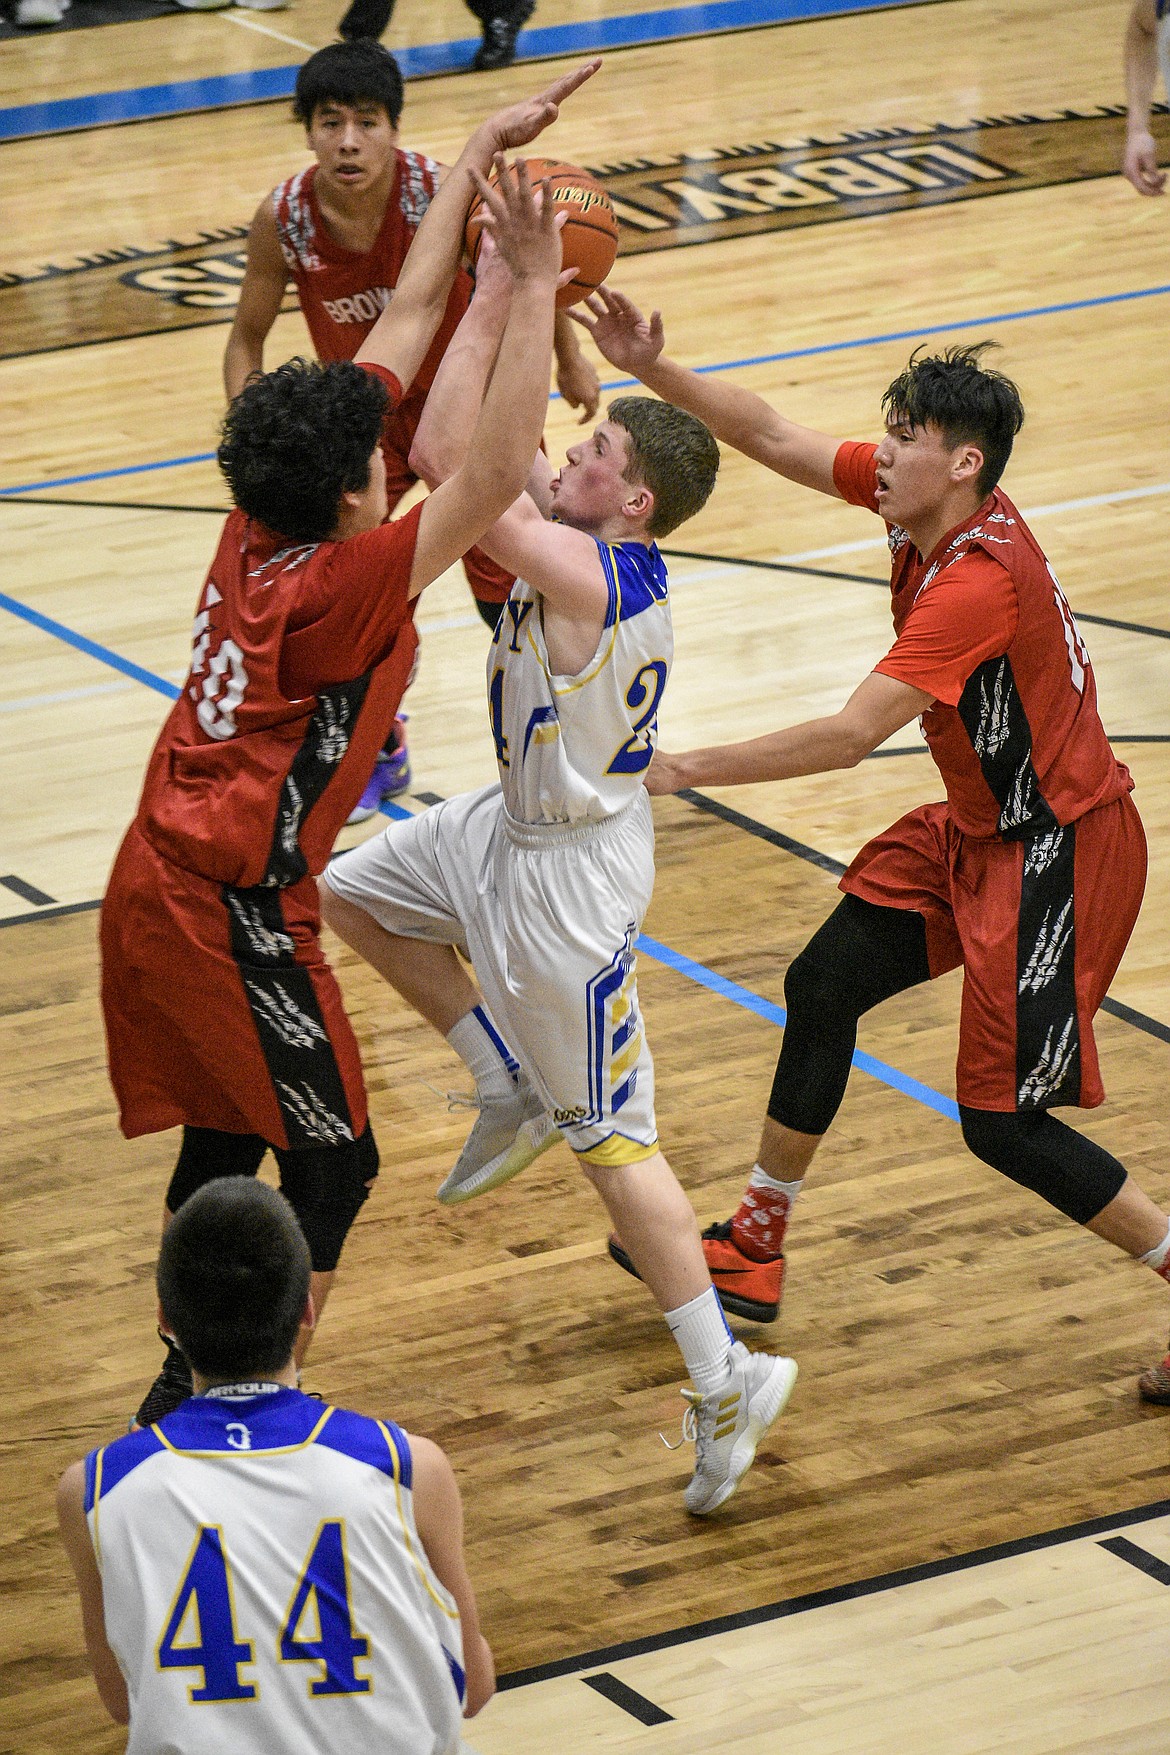 Libby sophomore Jay Beagle pushes through the Browning defenders to make a layup early in the fourth quarter against Browning Saturday. (Ben Kibbey/The Western News)